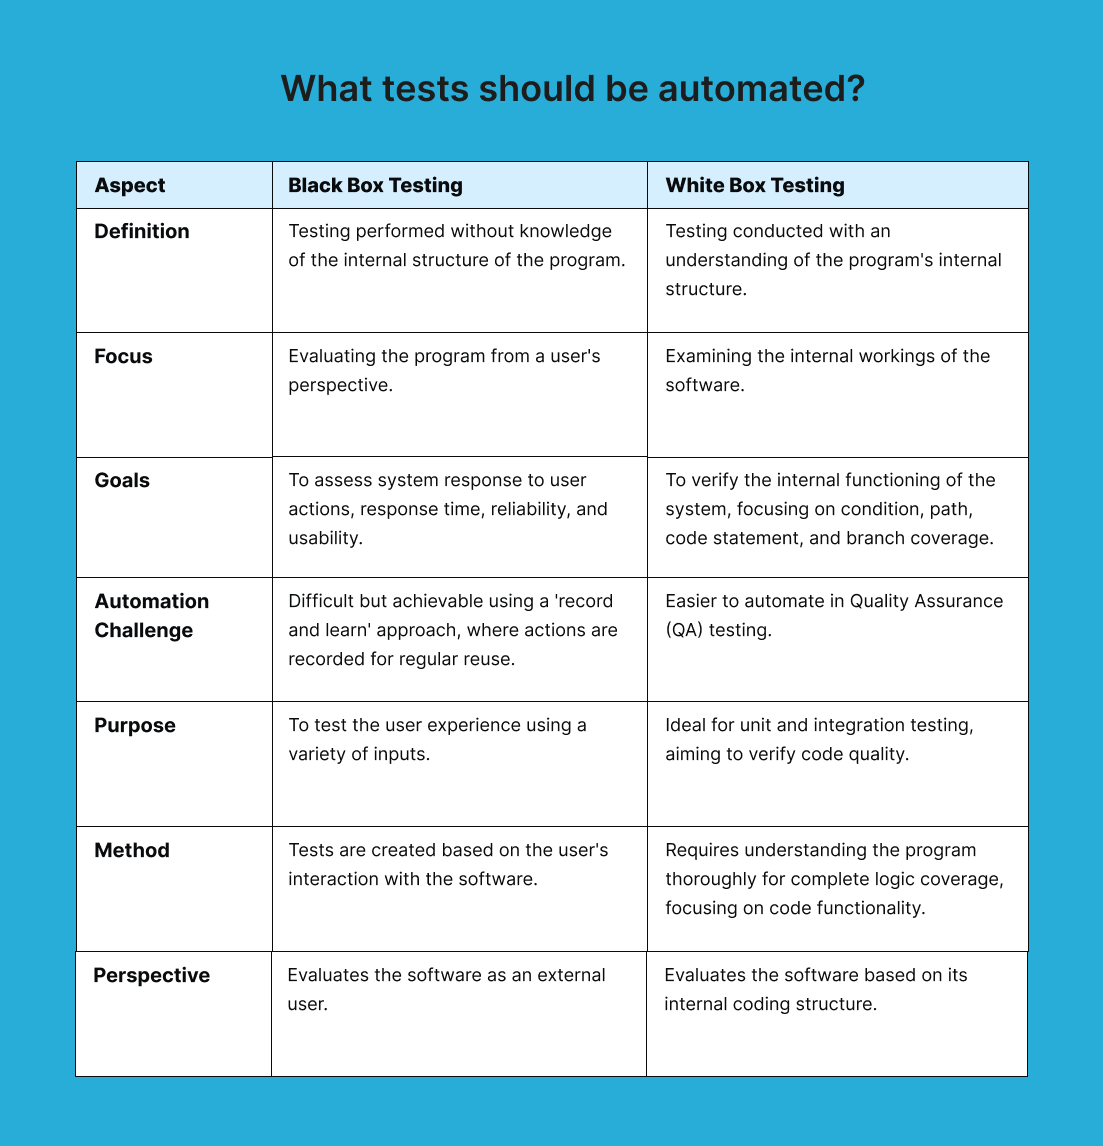 types-of-tests-to-be-automated-white-box-testing-black-box-testing